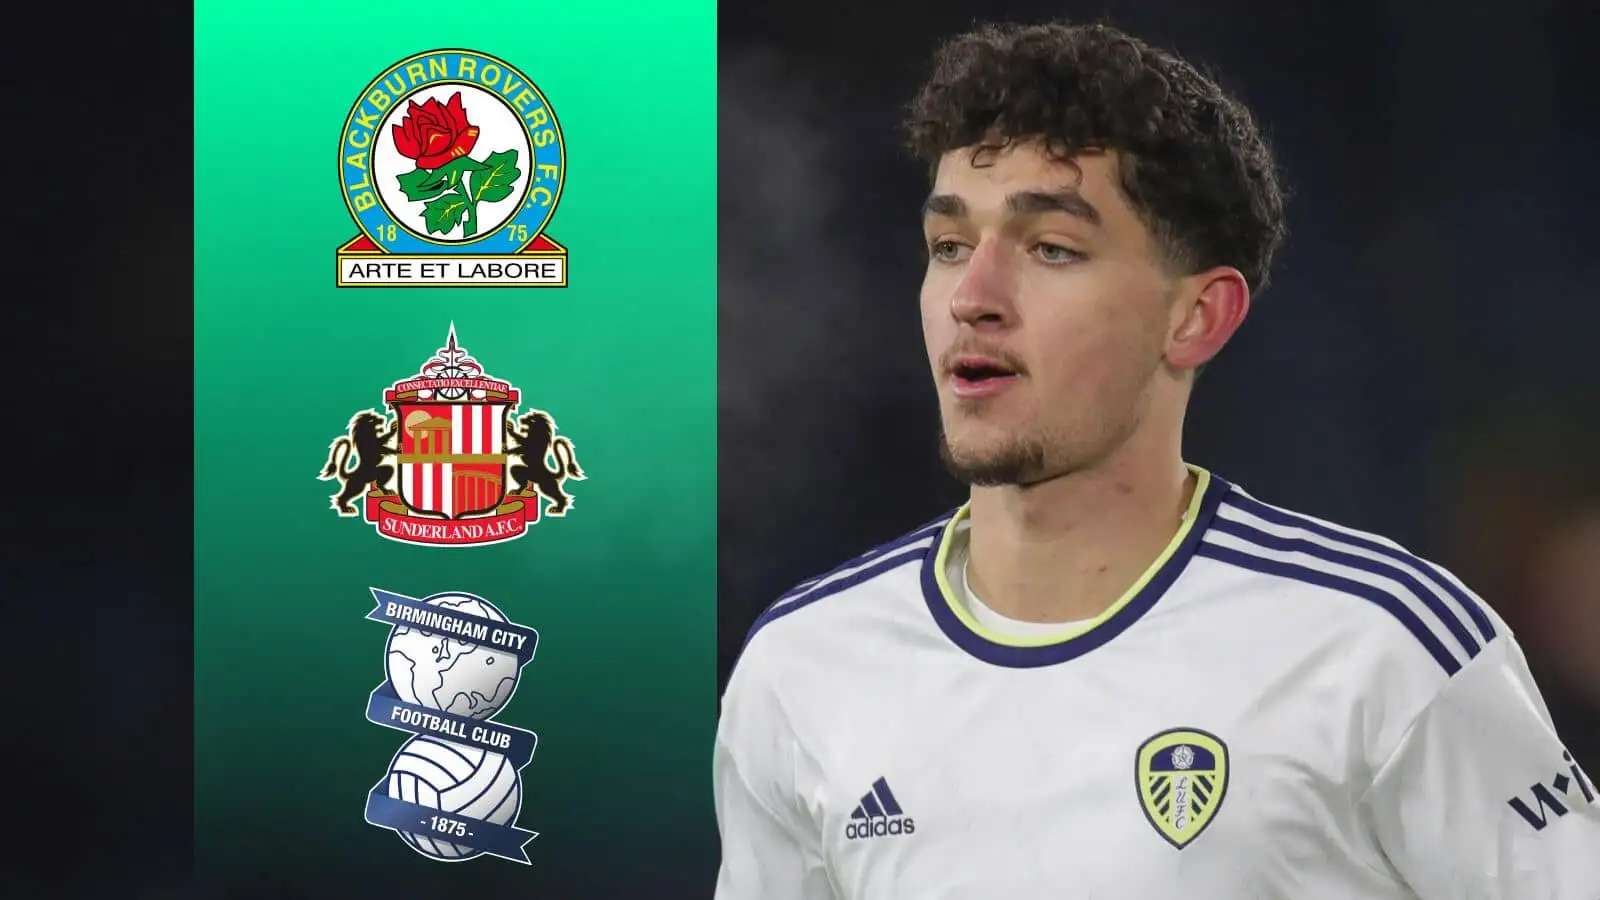 Sources: Leeds greenlight Championship loan exit as Blackburn, Sunderland launch attempts to sign Sonny Perkins